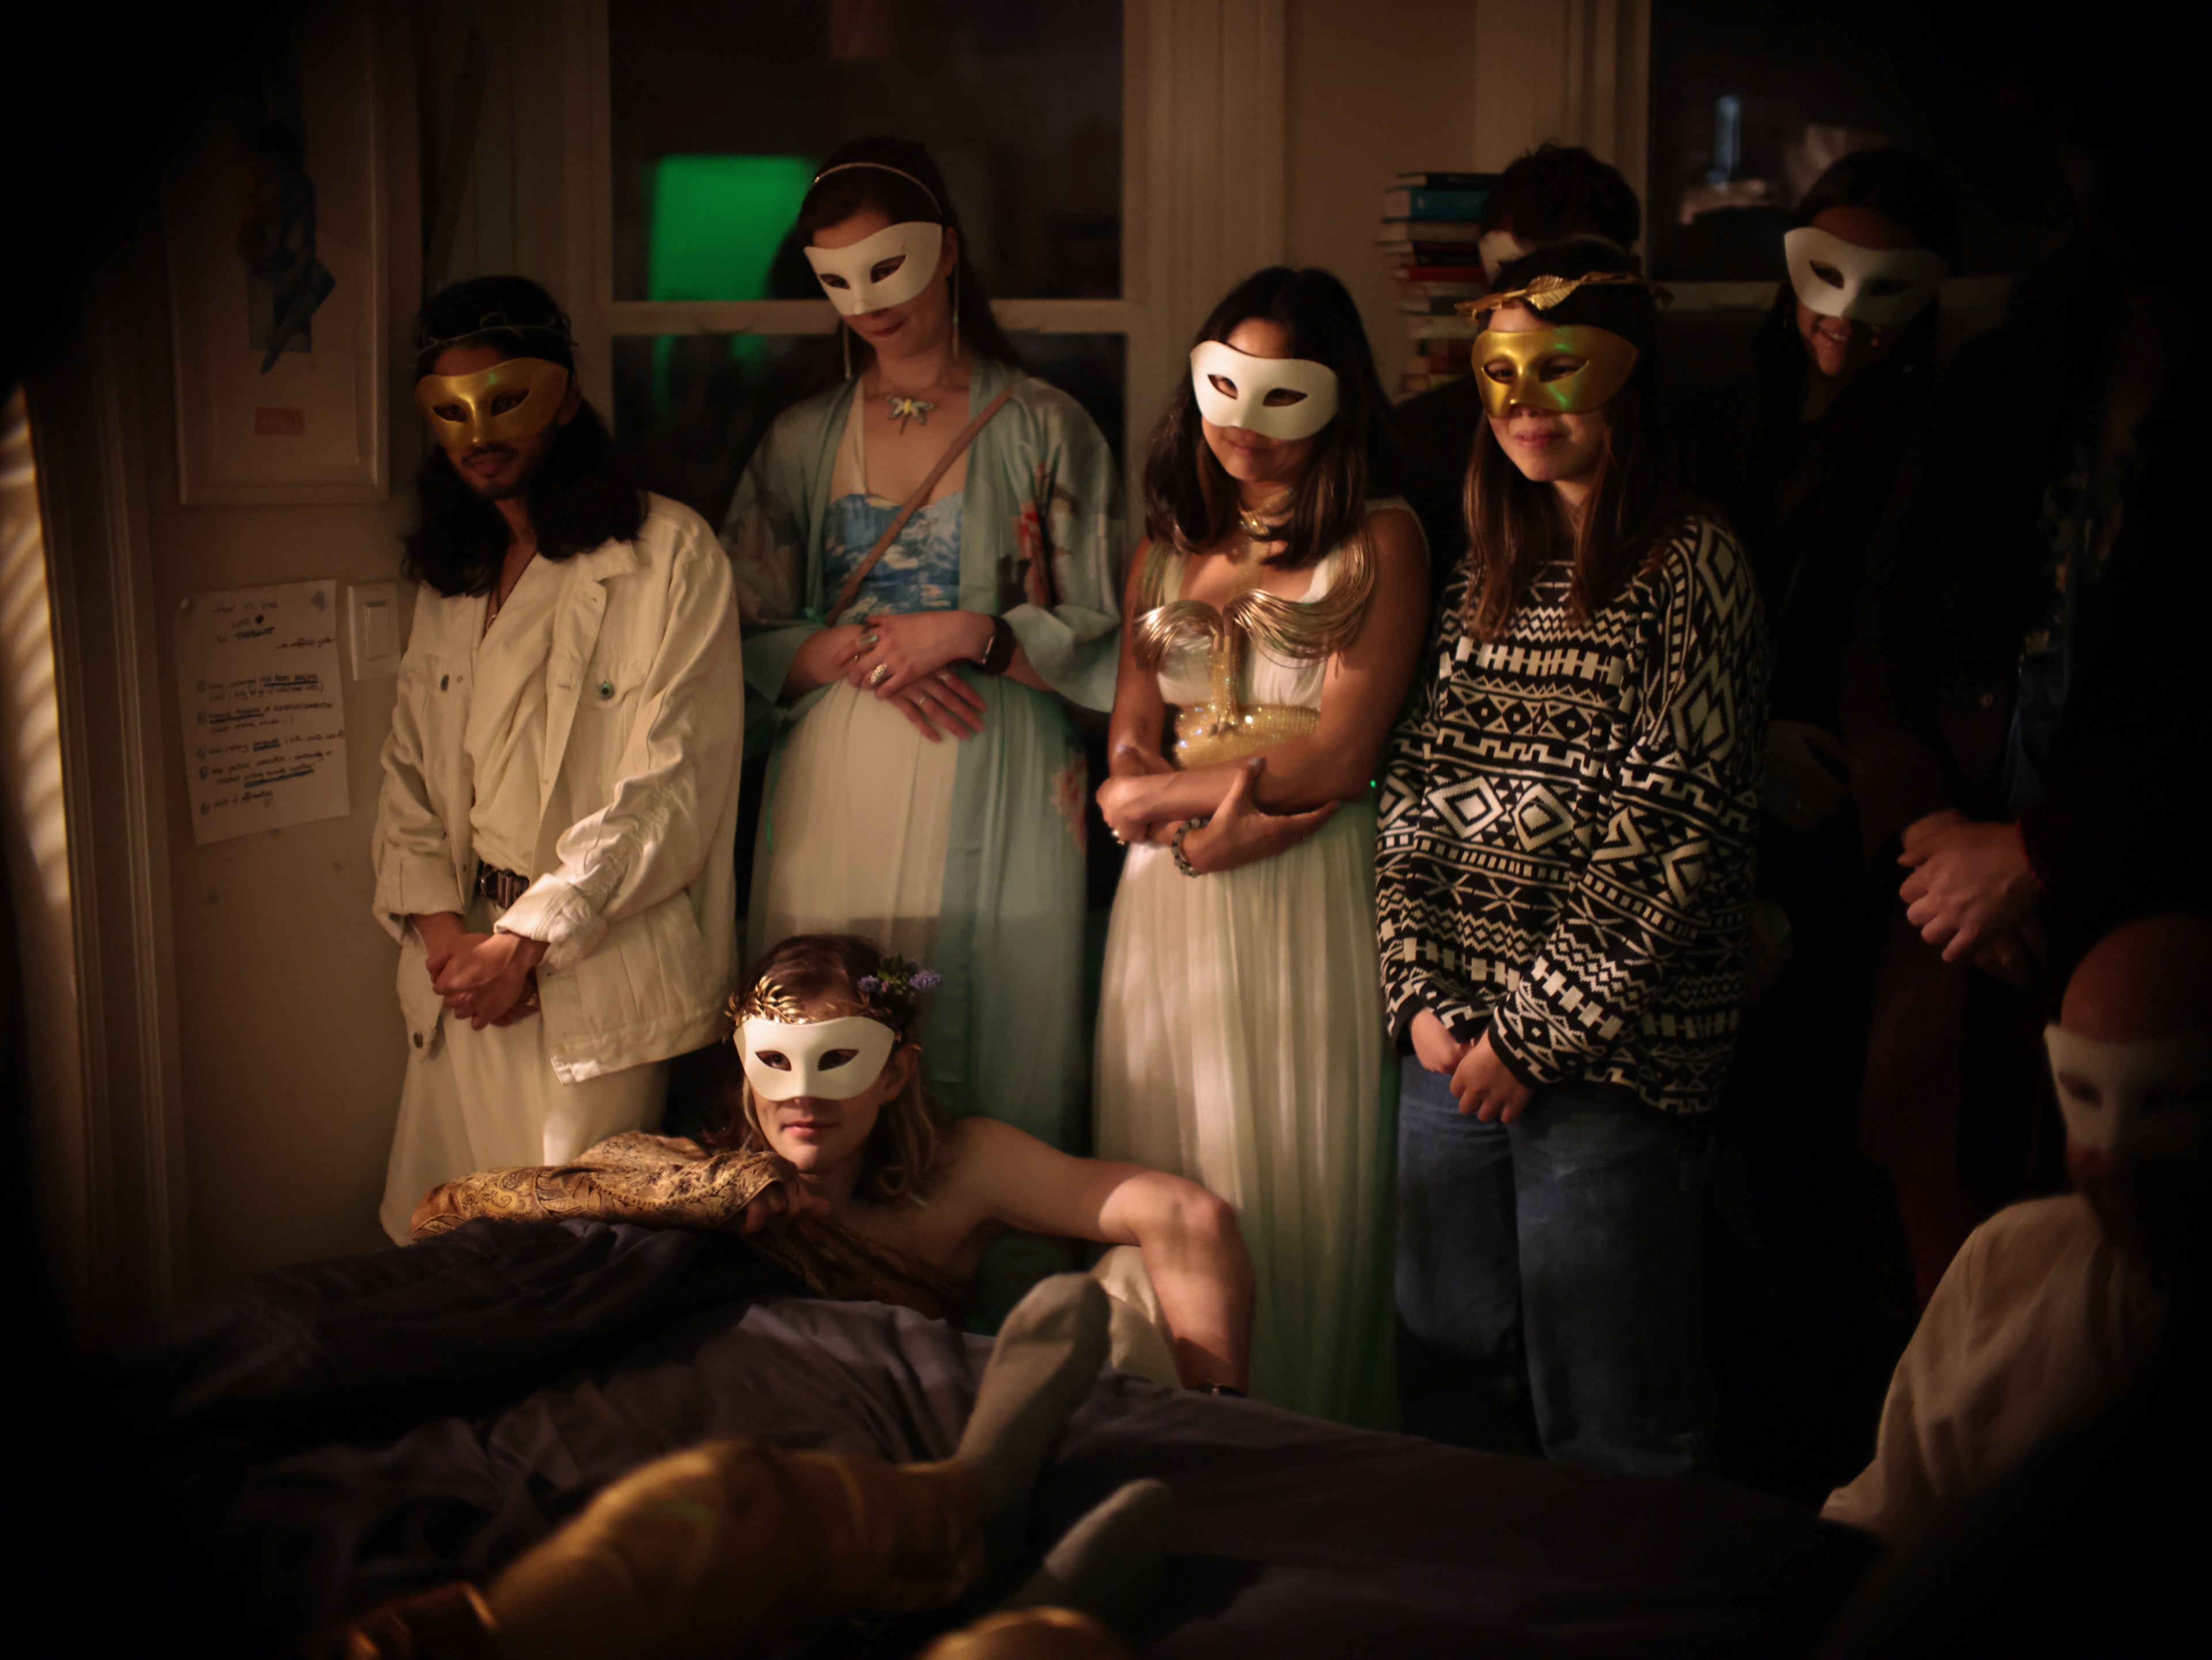 Group of people in masks in a dimly lit room, some standing, one lying down.